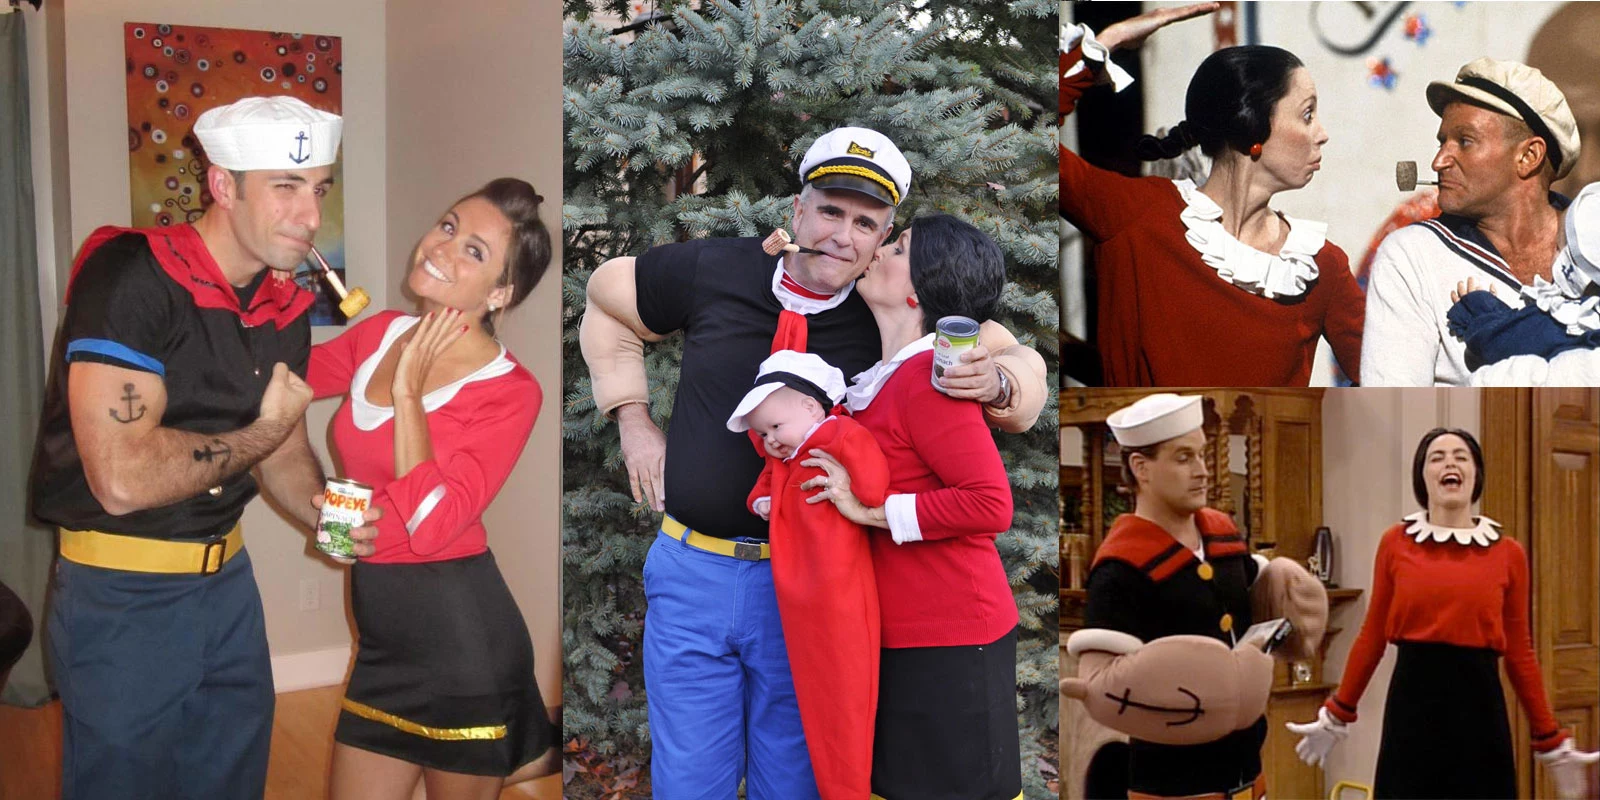 several couples dressed like popeye and olive oyl, cute couple halloween costumes, sailor outfits and hats, red jumpers and blakc skirts